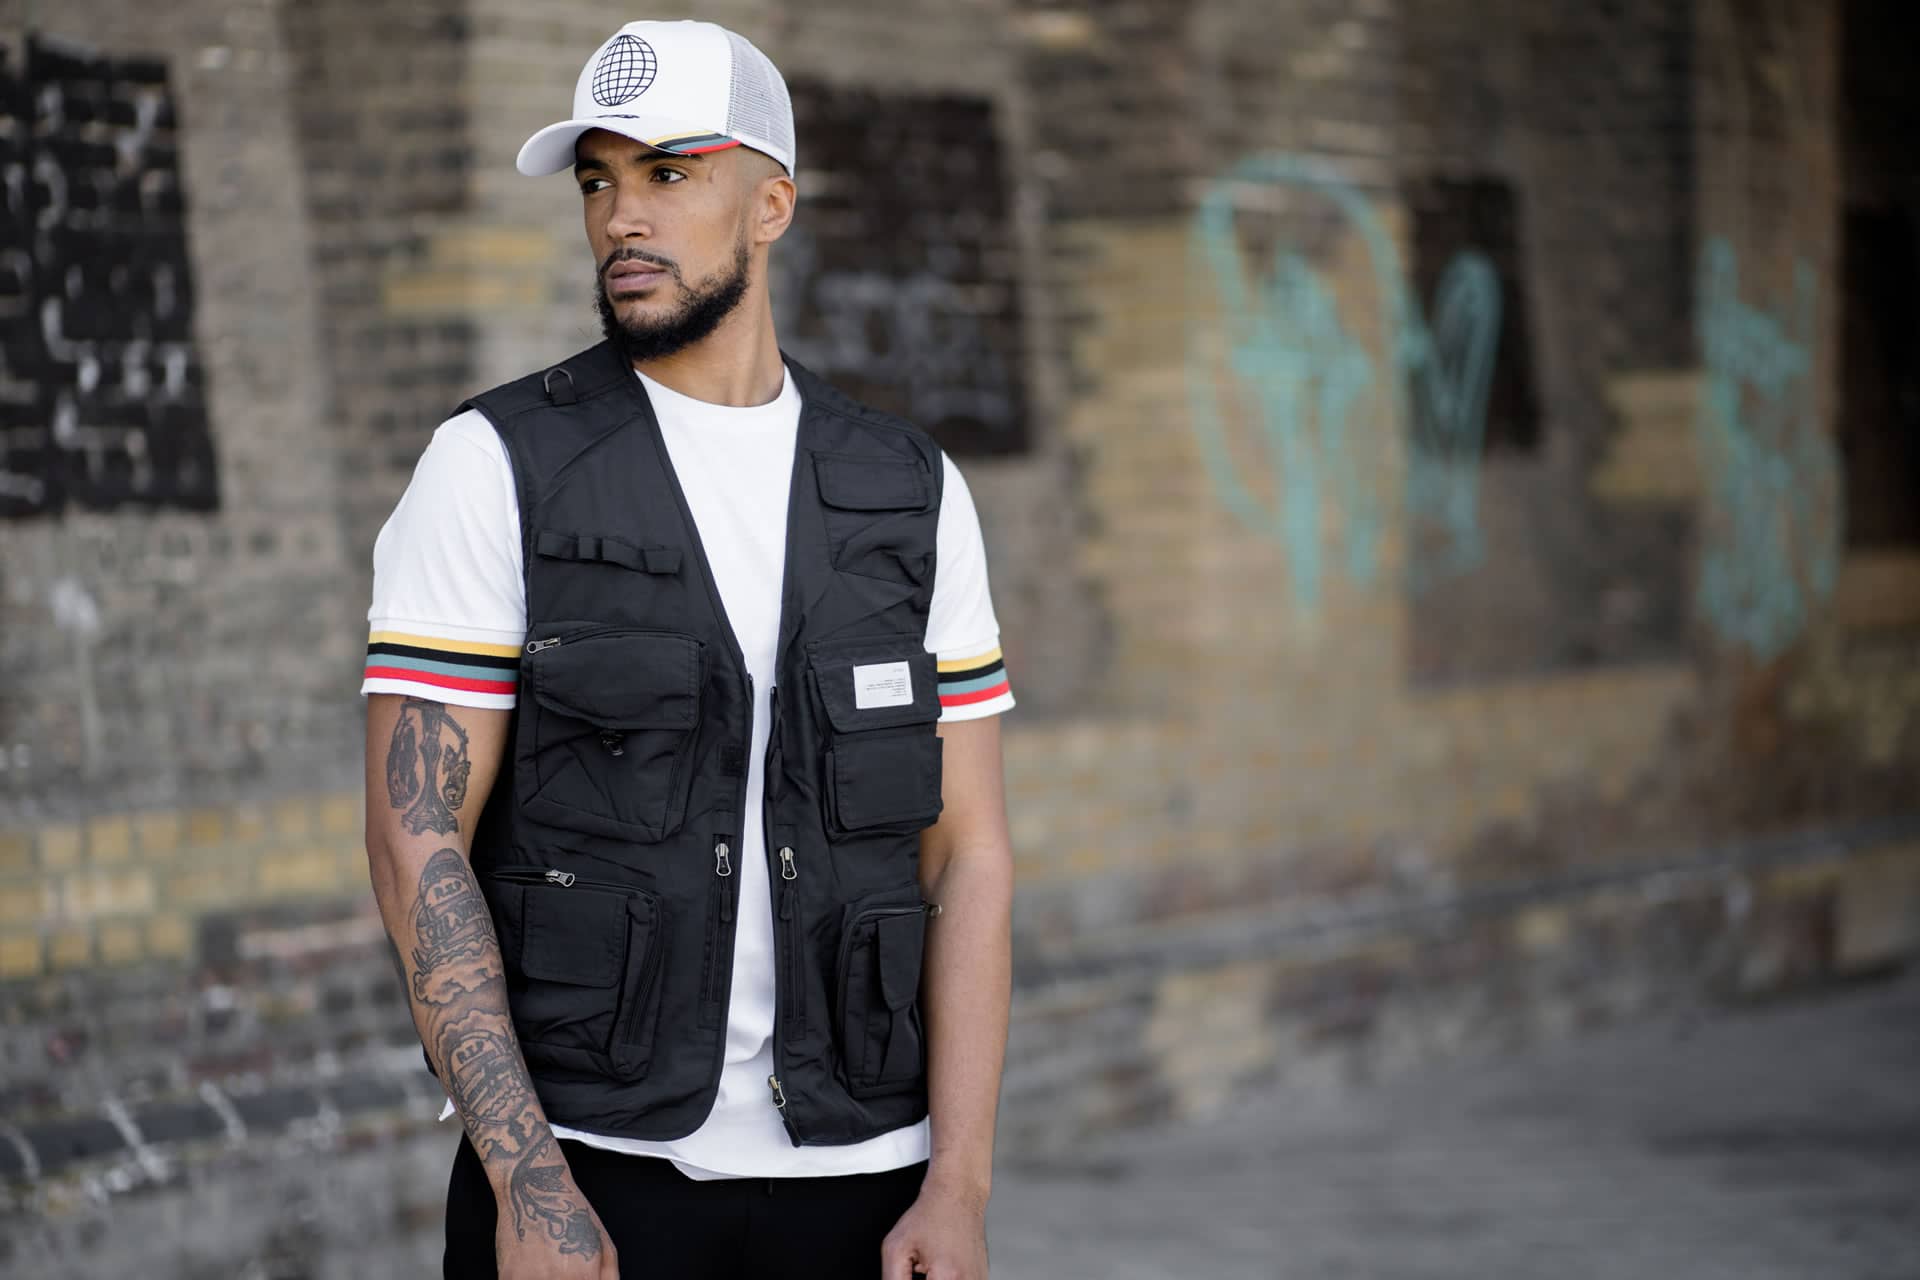 Myers wears King Apparel Bethnal mesh trucker cap and t-shirt in white and Earlham Techwear tactical vest in black